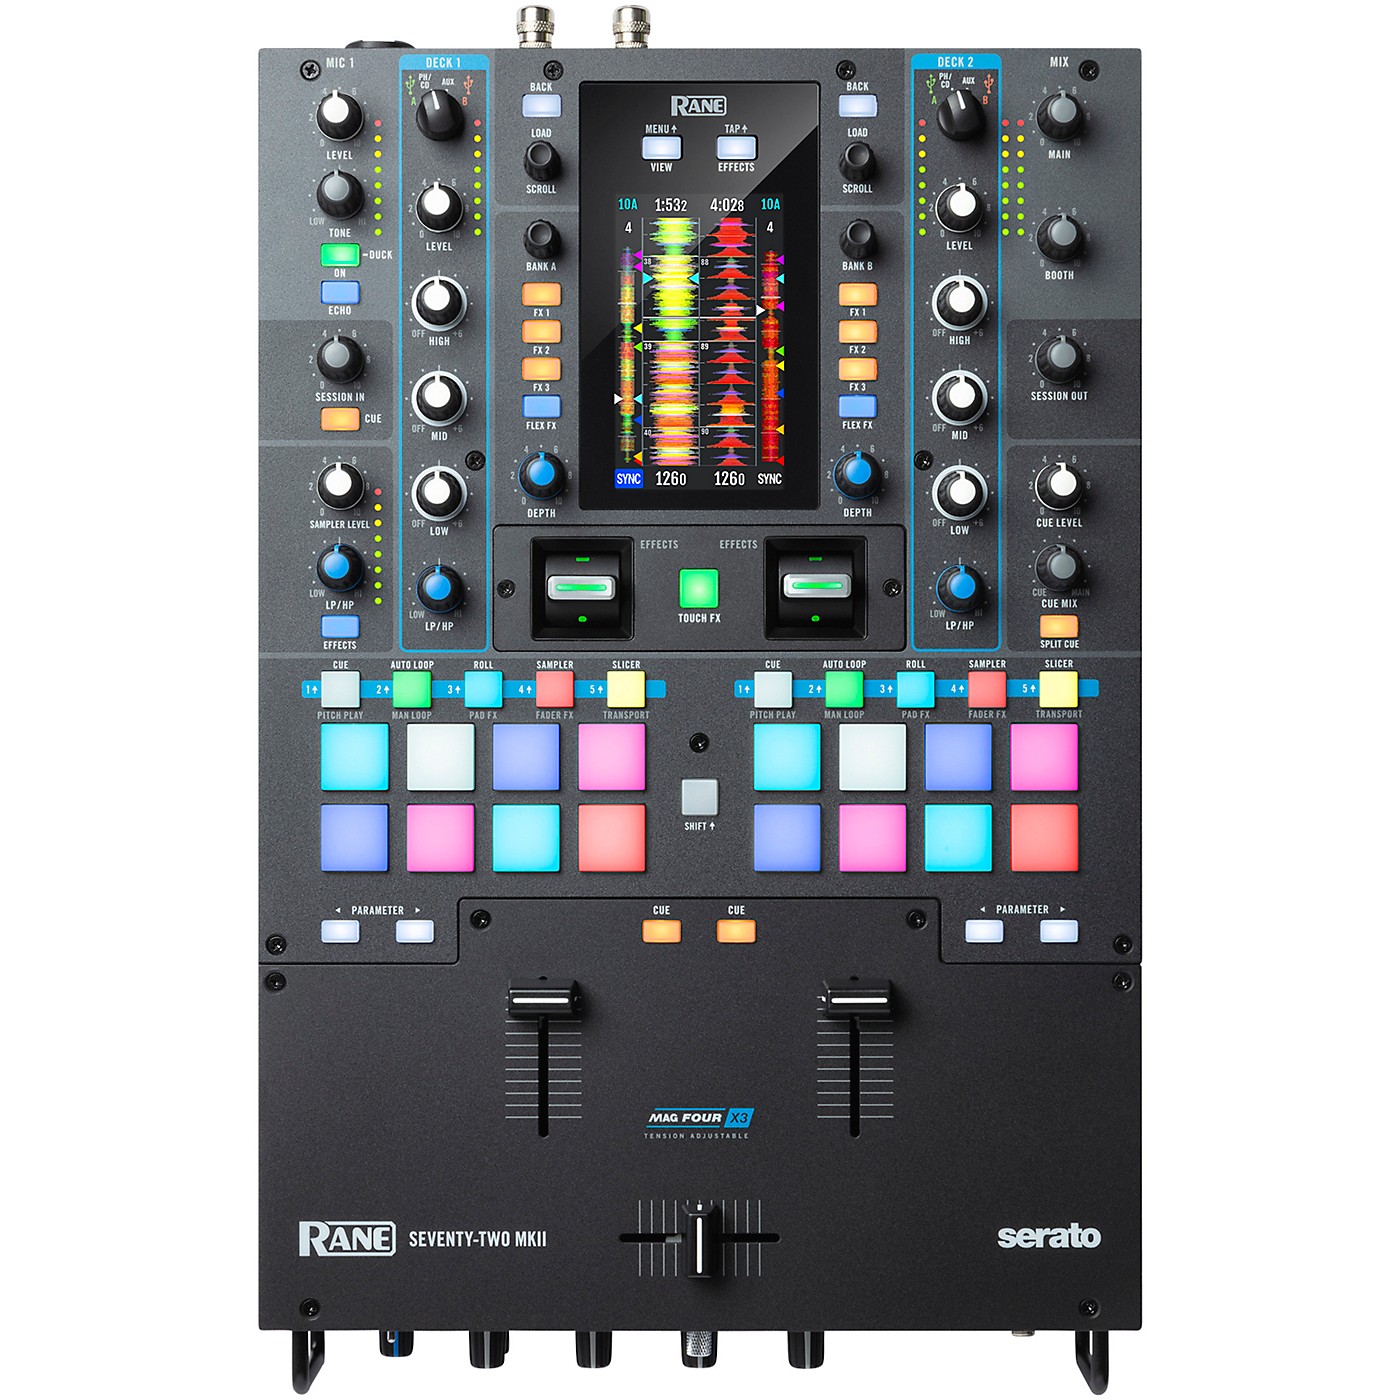 RANE SEVENTY-TWO MKII Battle-Ready 2-Channel DJ Mixer With Multi-Touch Screen and Serato DJ thumbnail